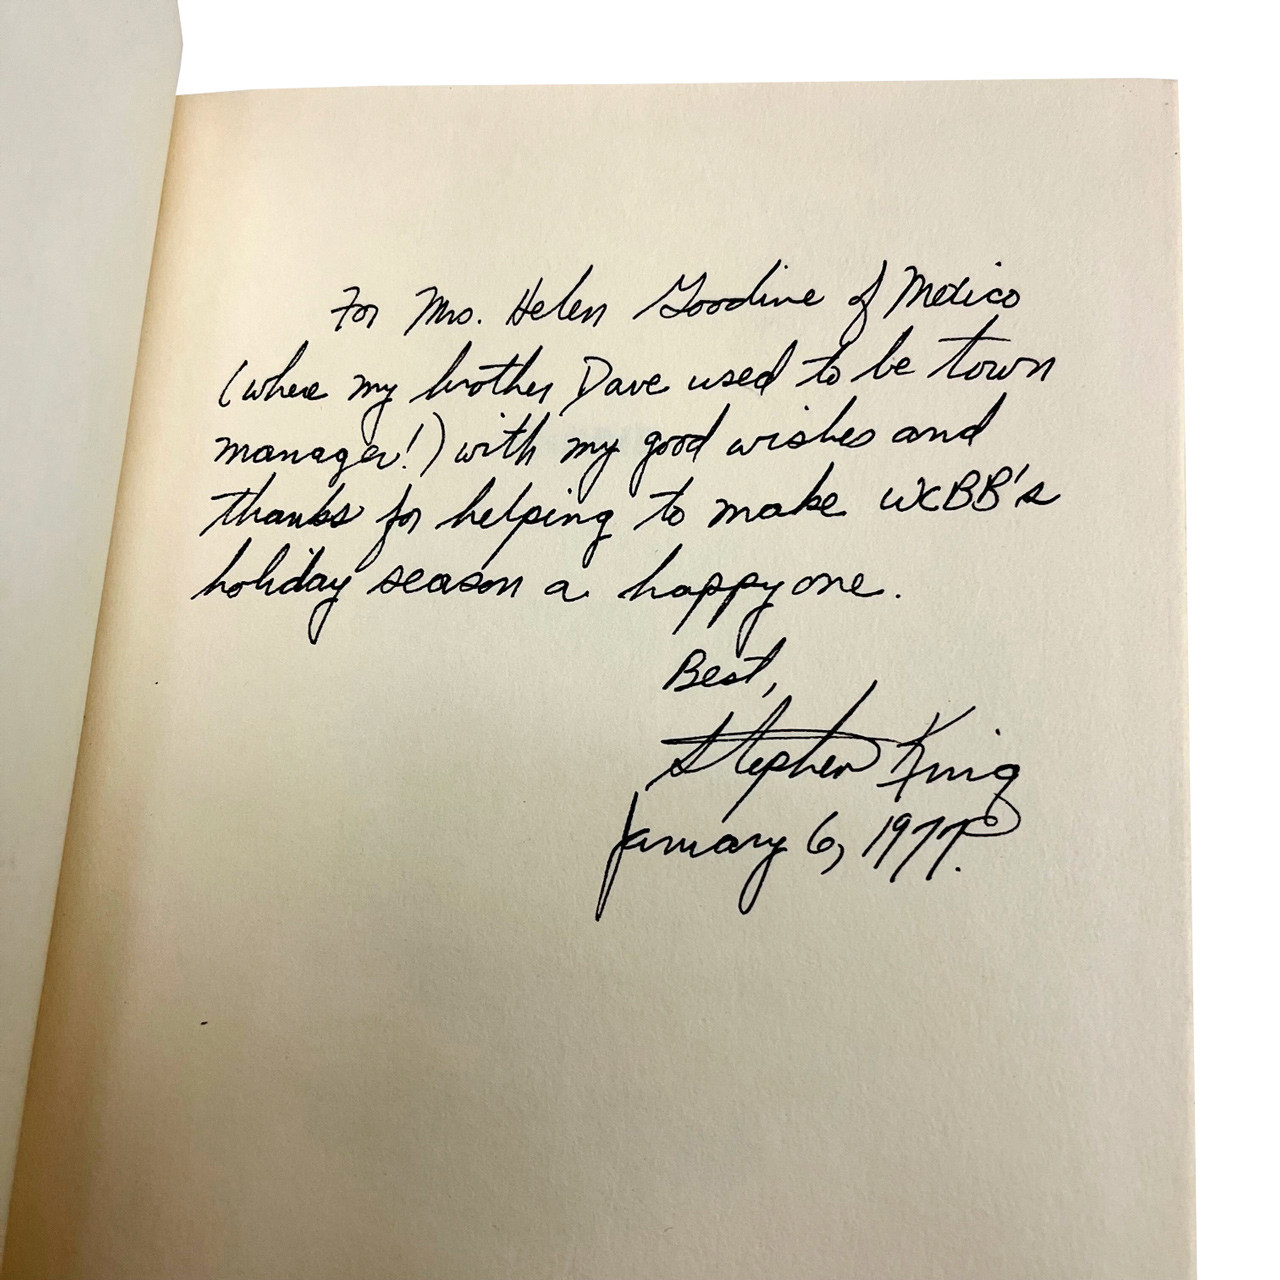 Stephen King "Carrie" (Signed First Edition), "Salem's Lot" (Signed First/Second) Matching Inscribed Association Set w/Provenance [Jan 6, 1977]